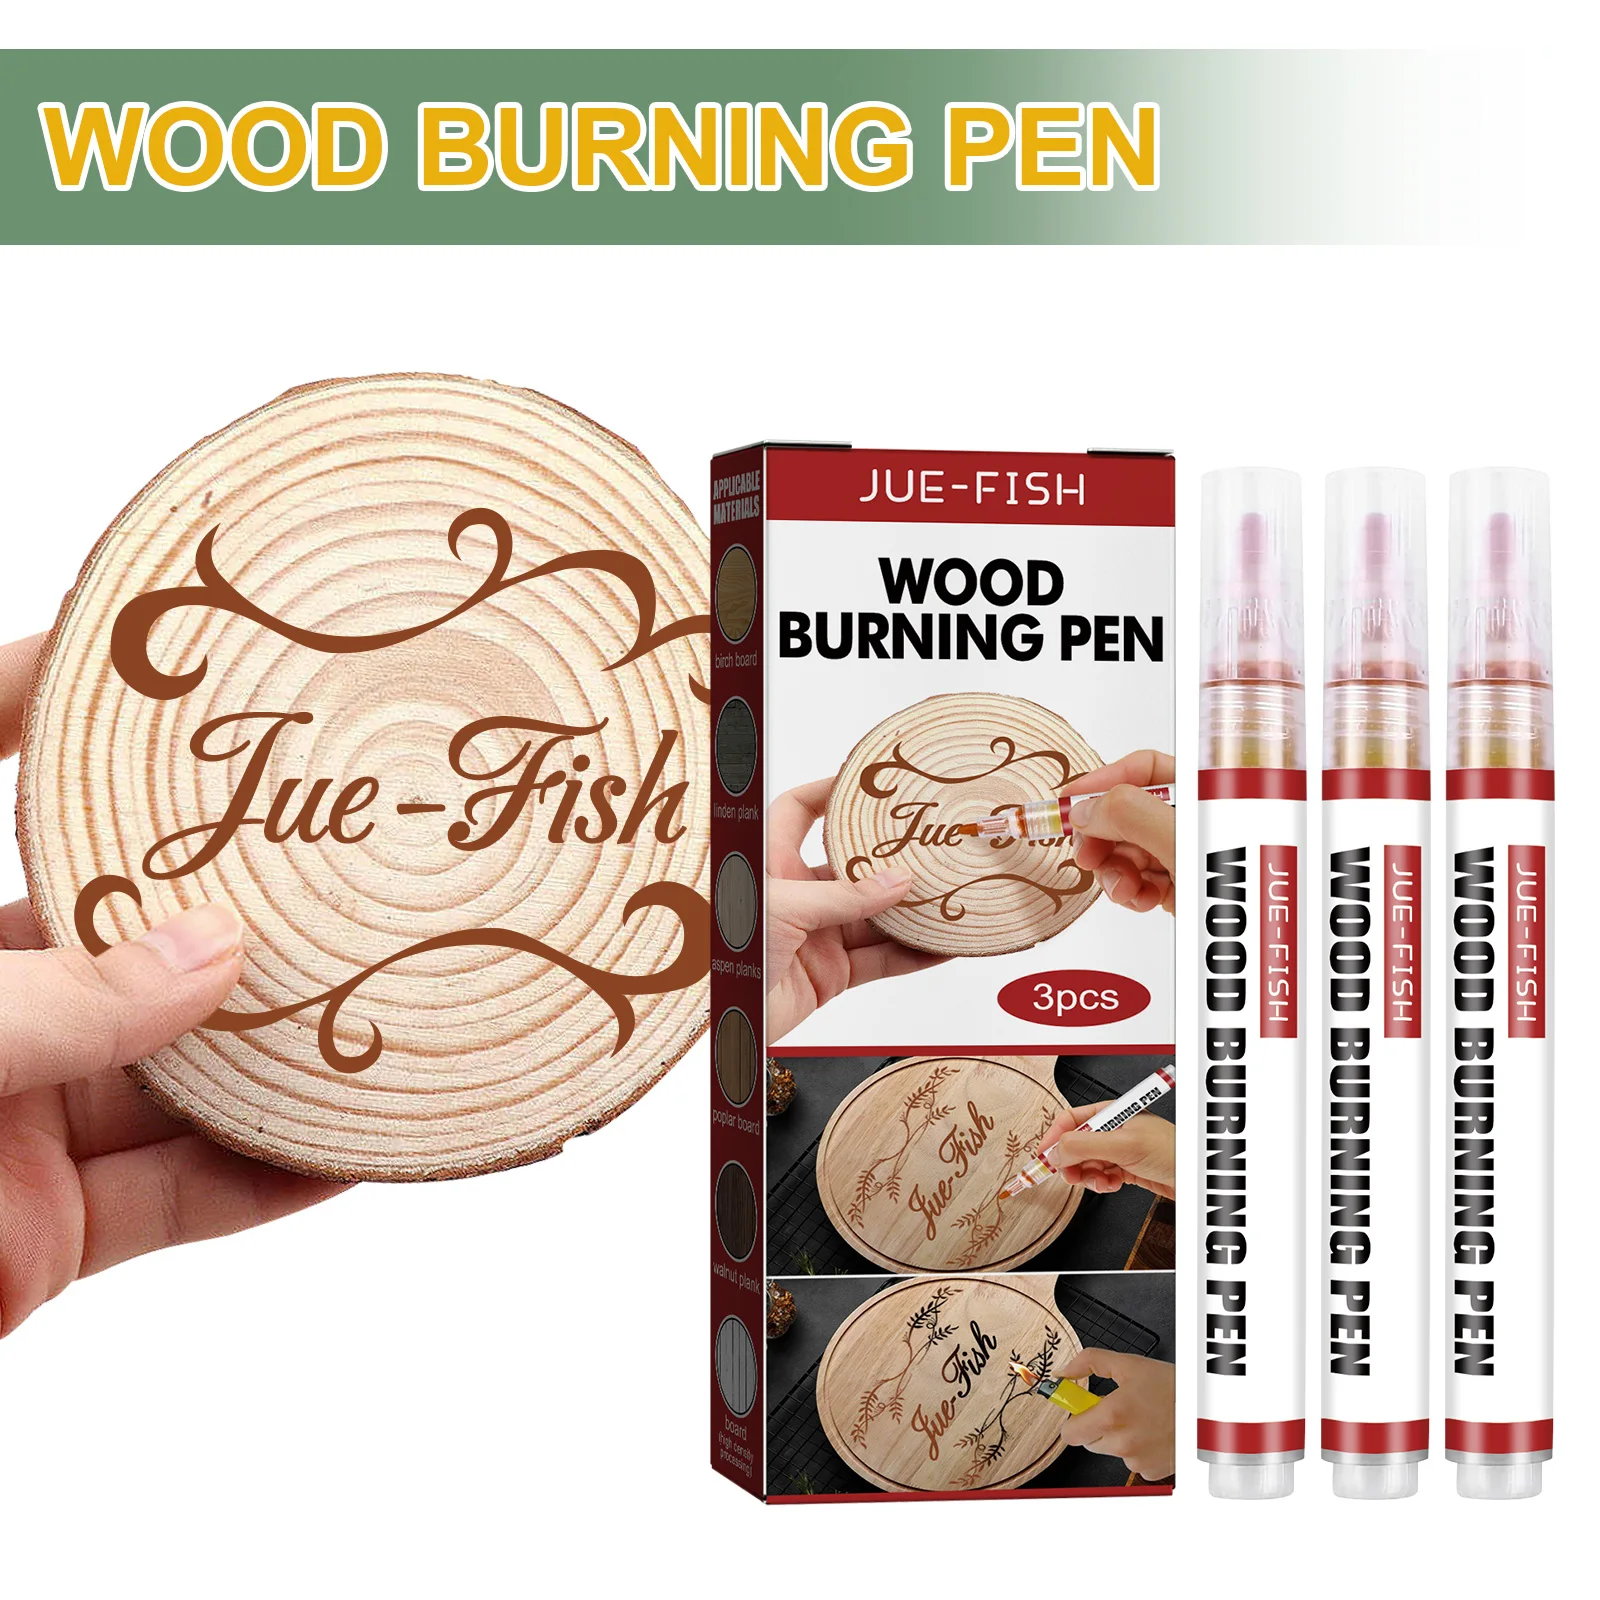 

3pcs/box Scorch Marker Chemical Wood Burning Pen for Project Painting DIY Pyrography Caramel Marker Art Pyrography Supplies